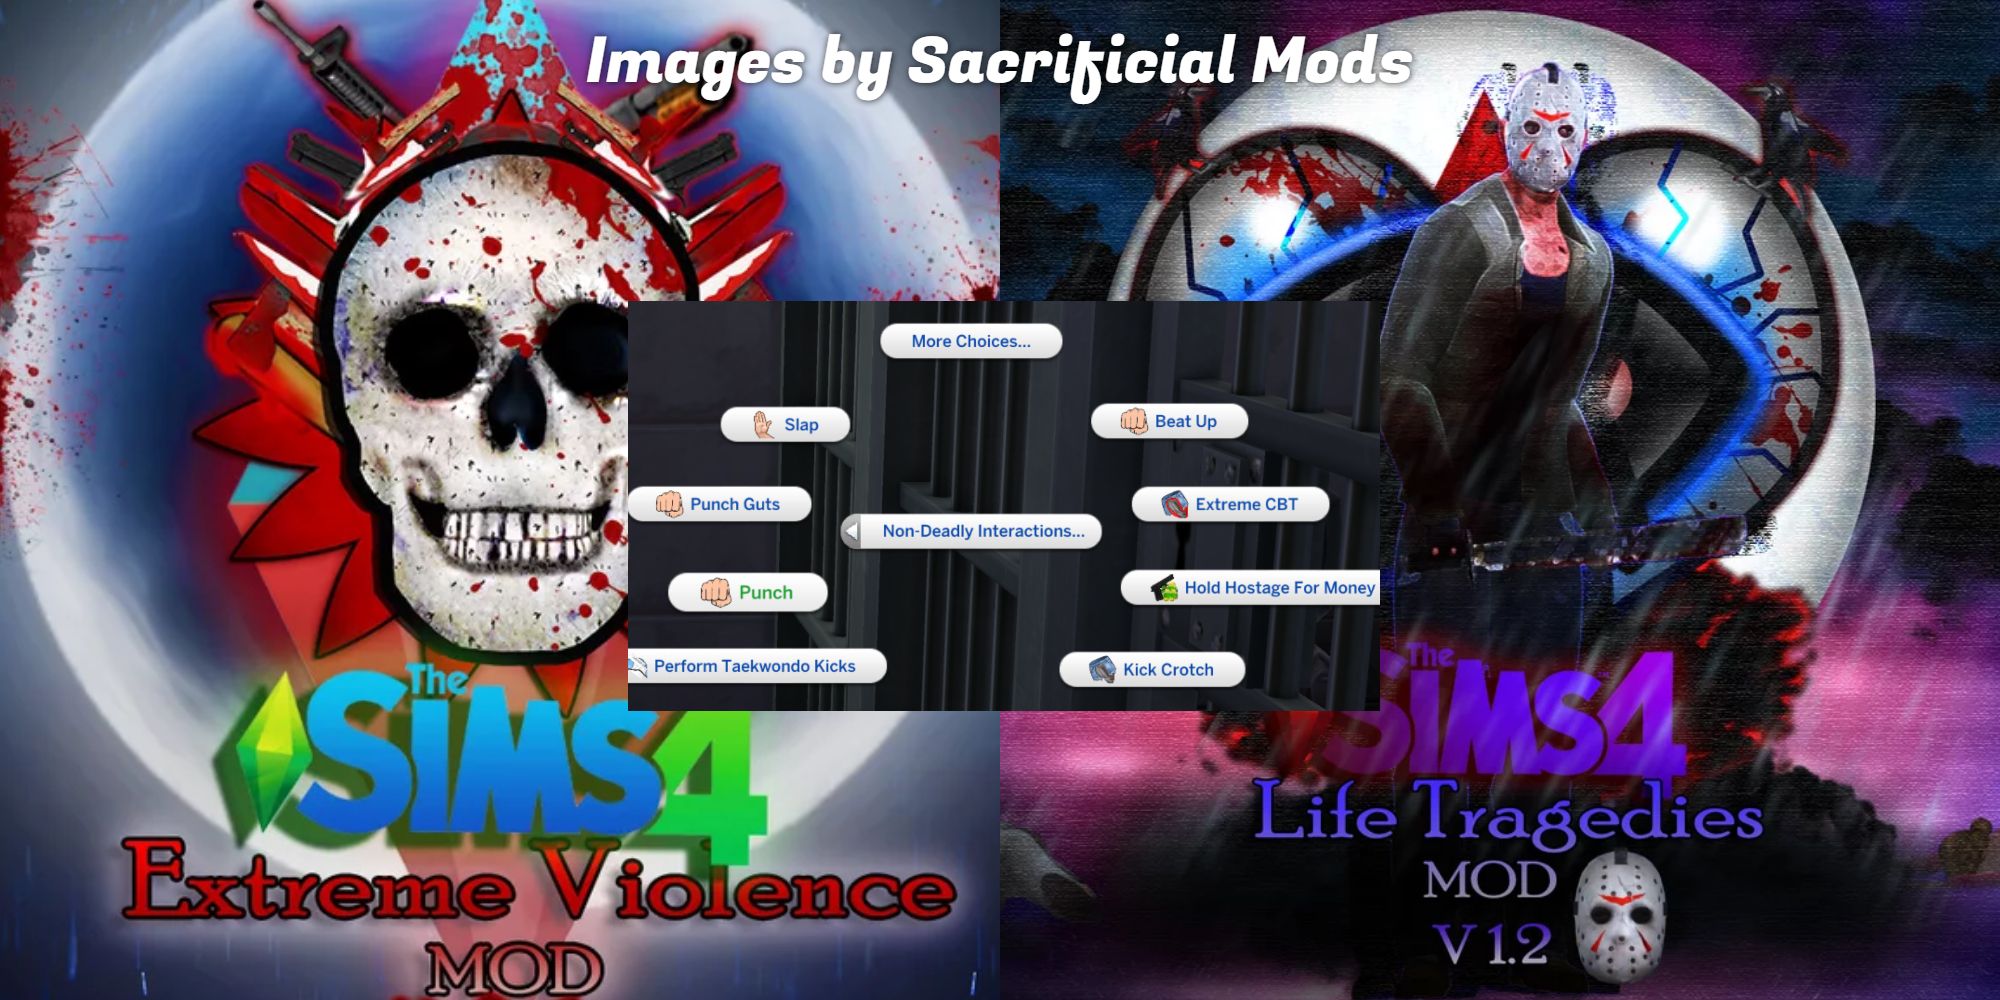 Evil players would benefit from downloading Sacrificial's Mods, such as the Extreme Violence and the Life Tragedies mods